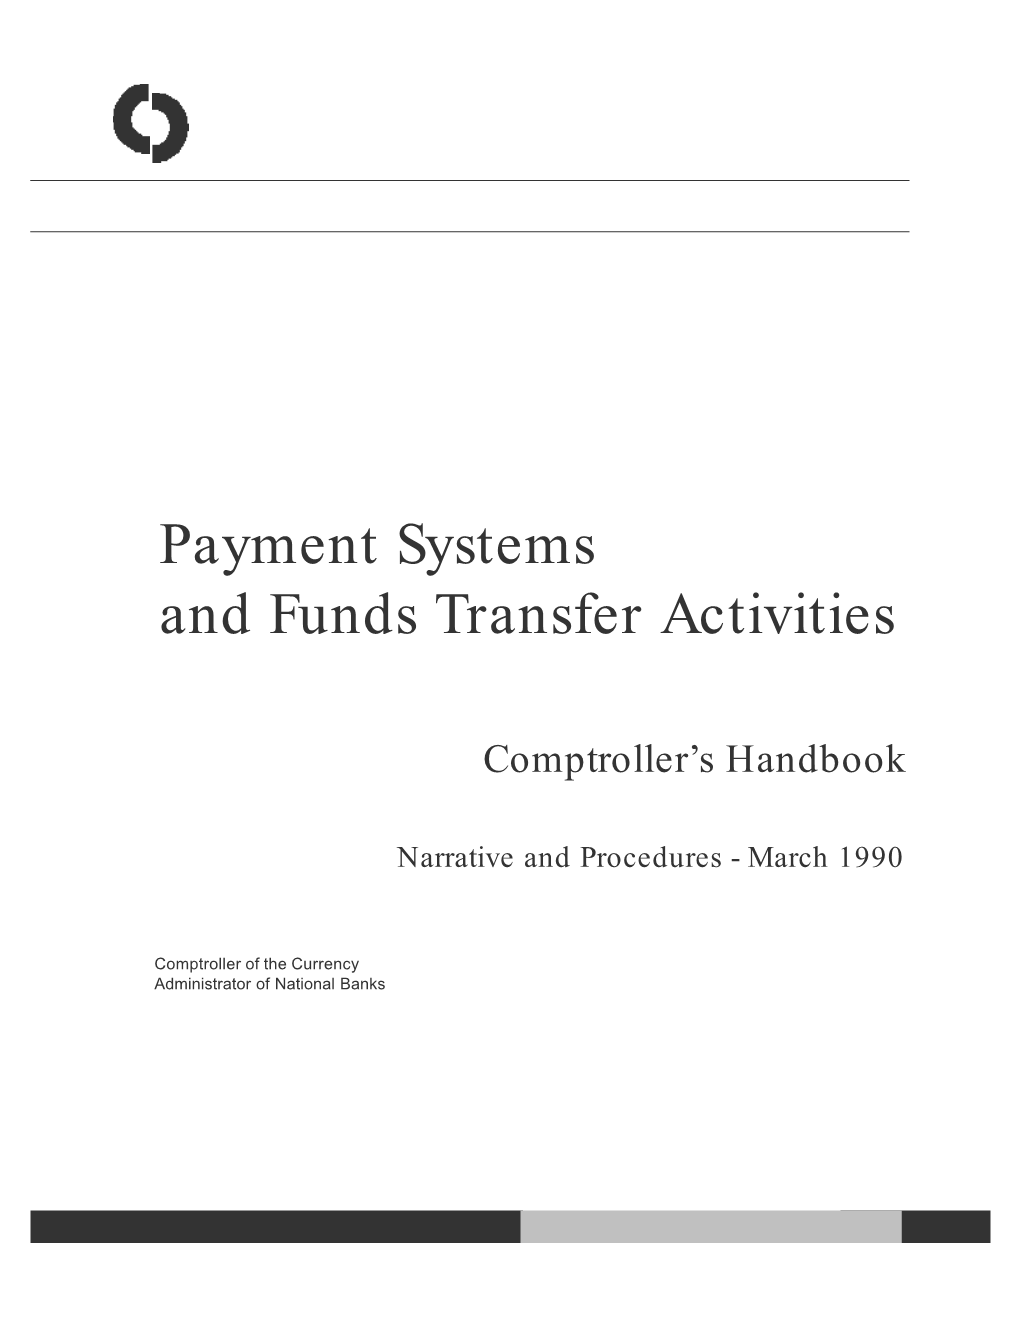 Payment Systems and Funds Transfer Activities